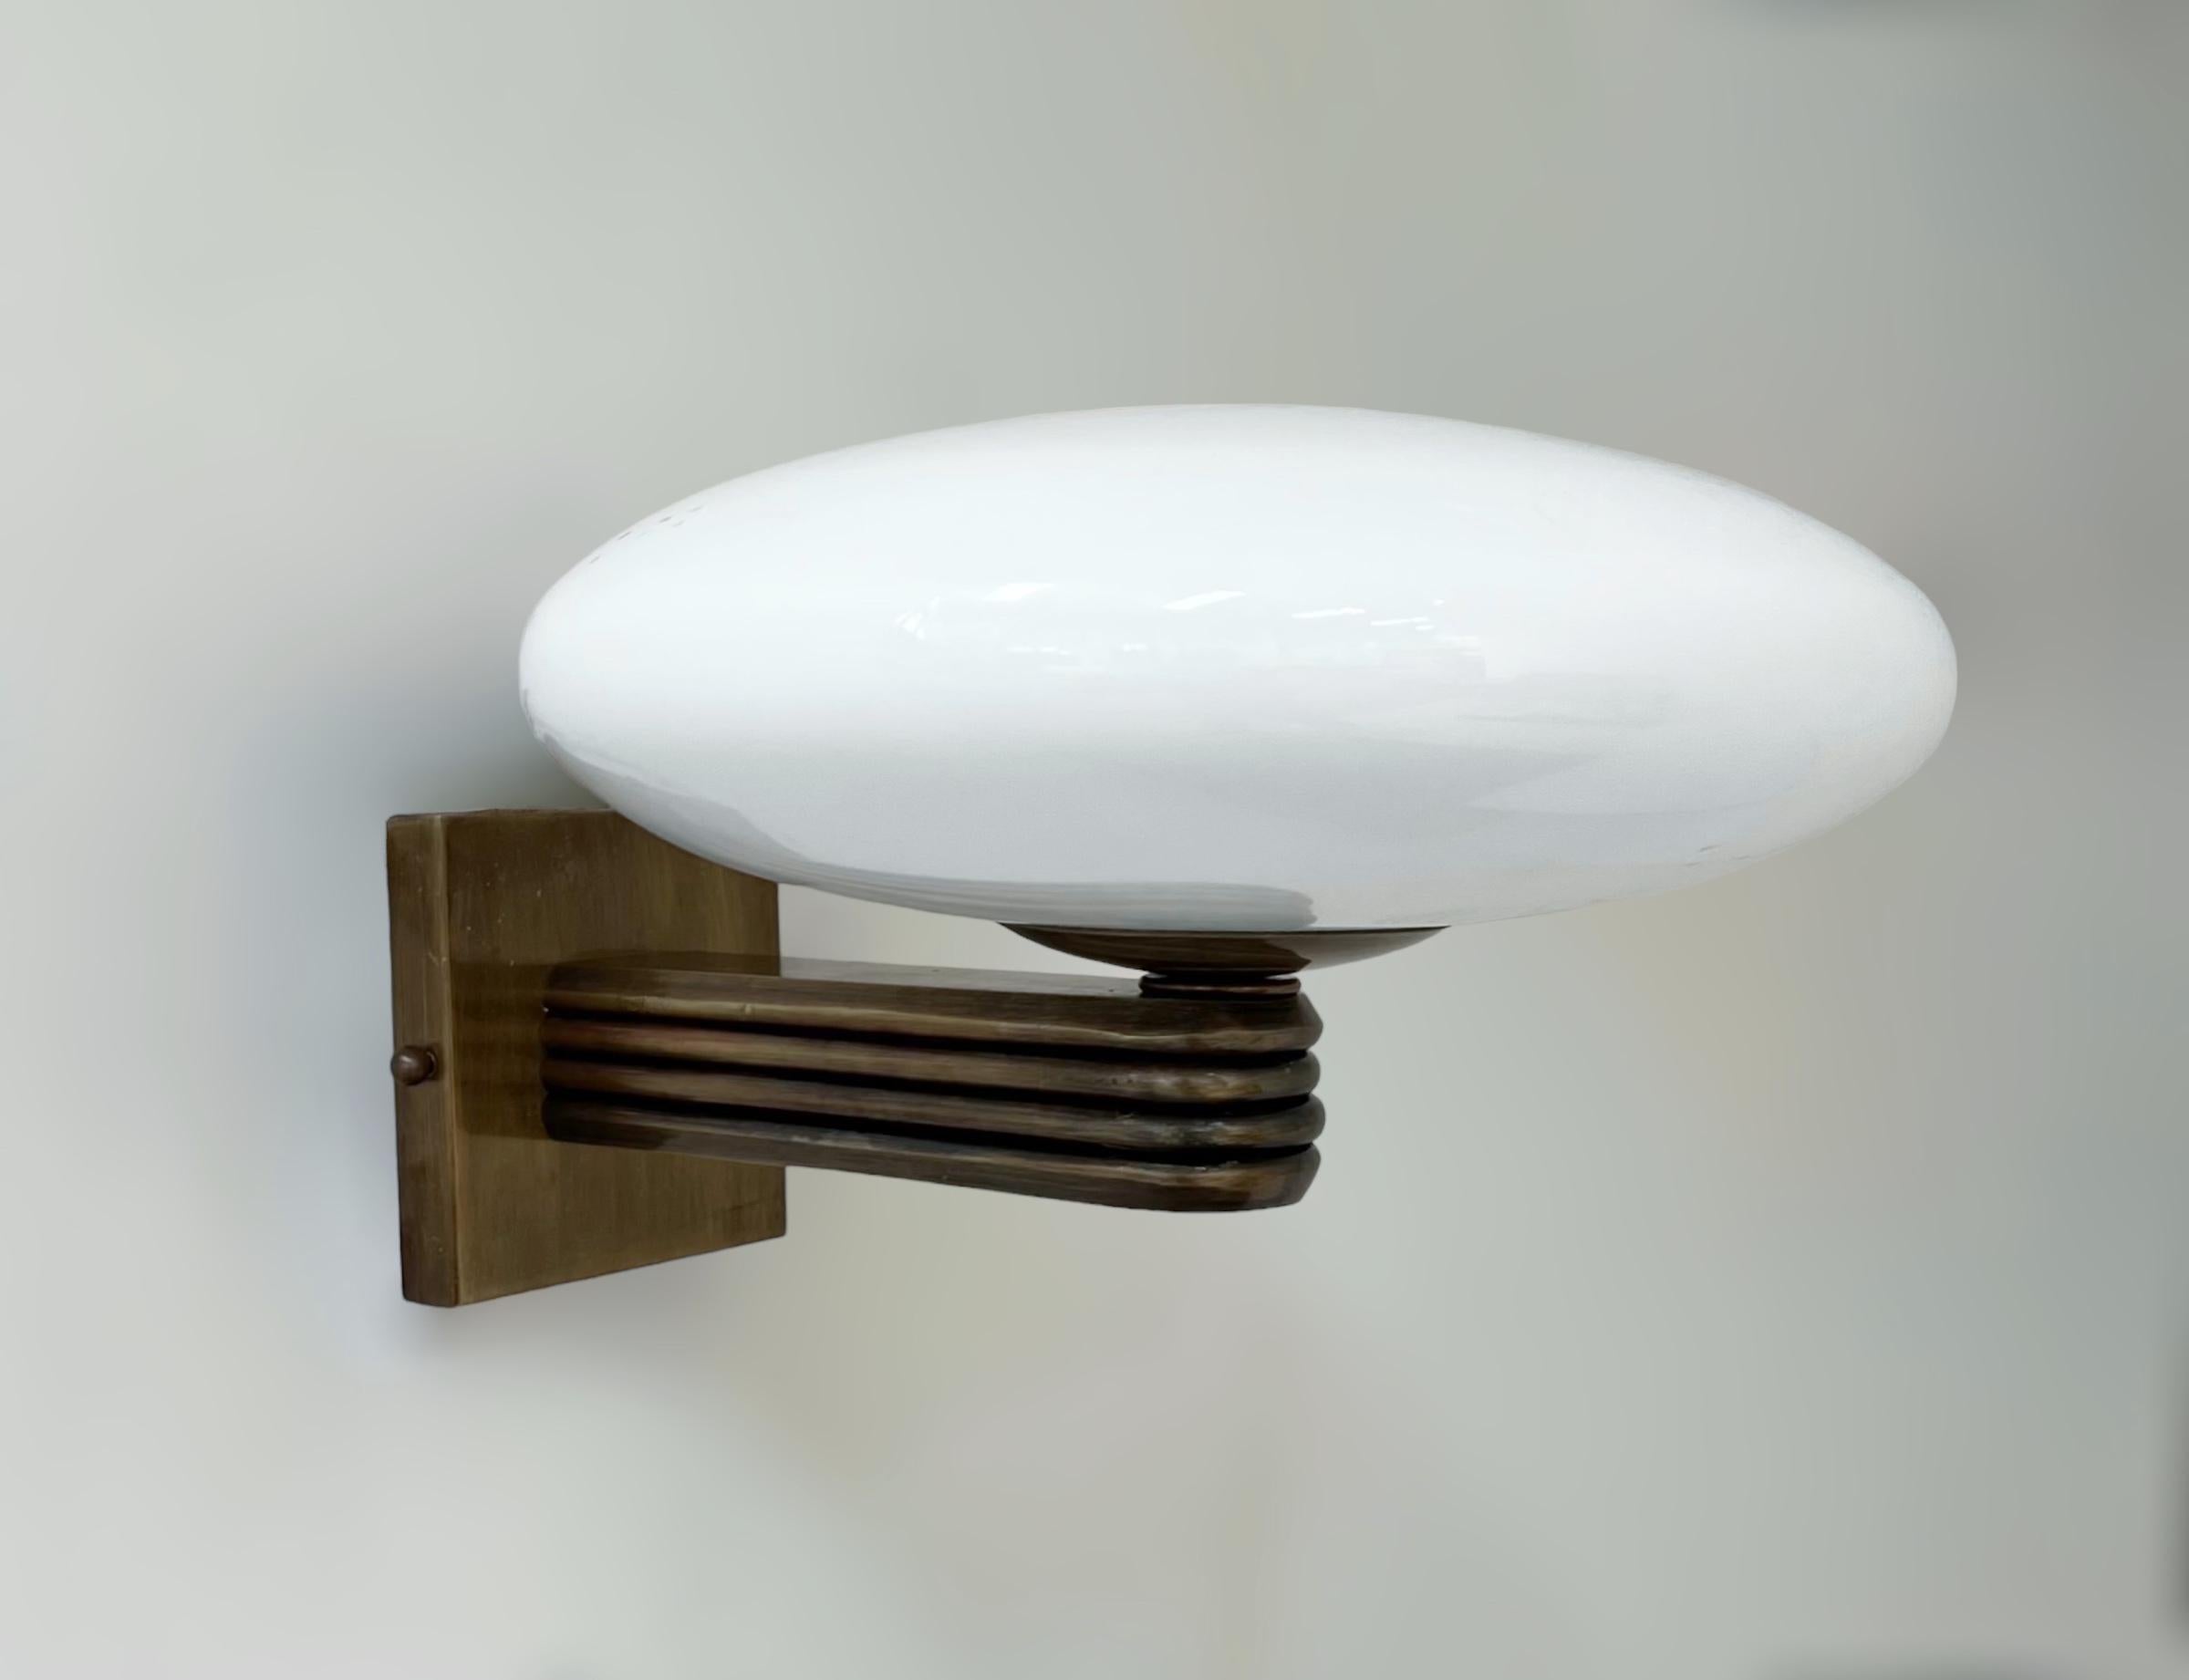 Italian Art Deco style wall light with glossy white Murano glass shade mounted on bronzed finish frame / Designed by Fabio Bergomi for Fabio Ltd / Made in Italy
1 light / E12 or E14 type / max 40W
Measures: Height 8.5 inches, width 12 inches, depth